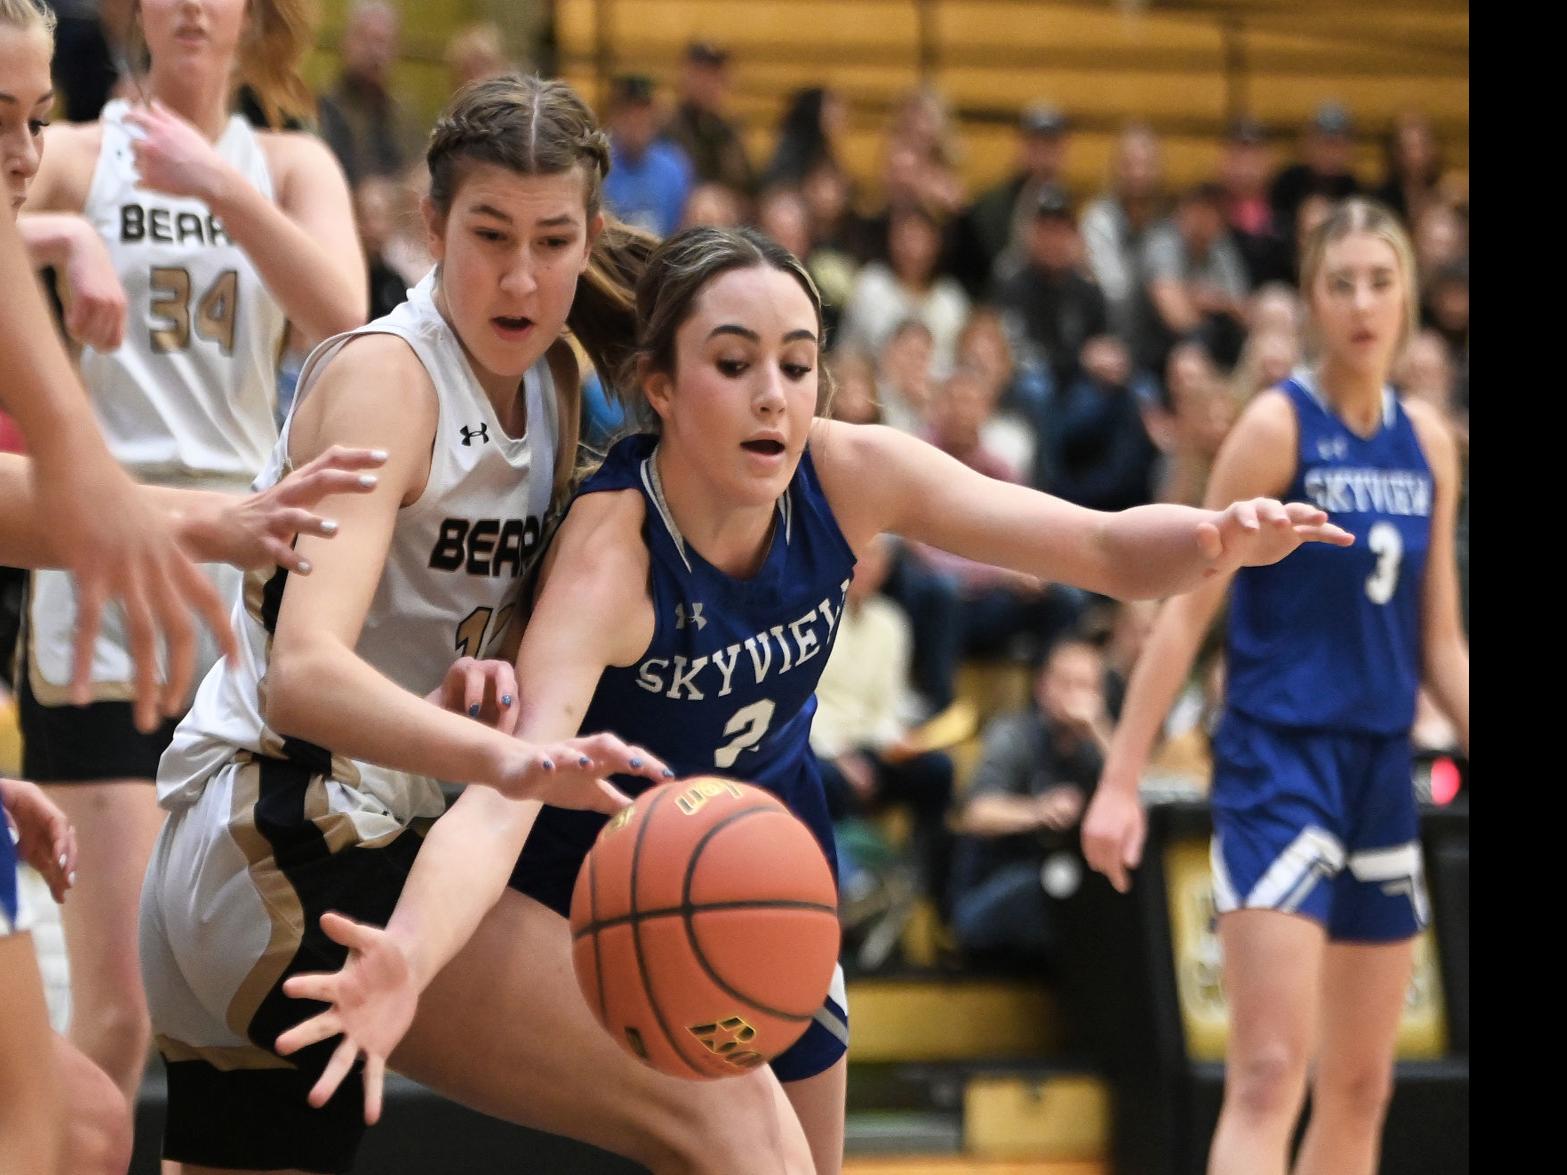 Girls basketball: Orcutt Academy scores major upset in state playoffs, Local Sports